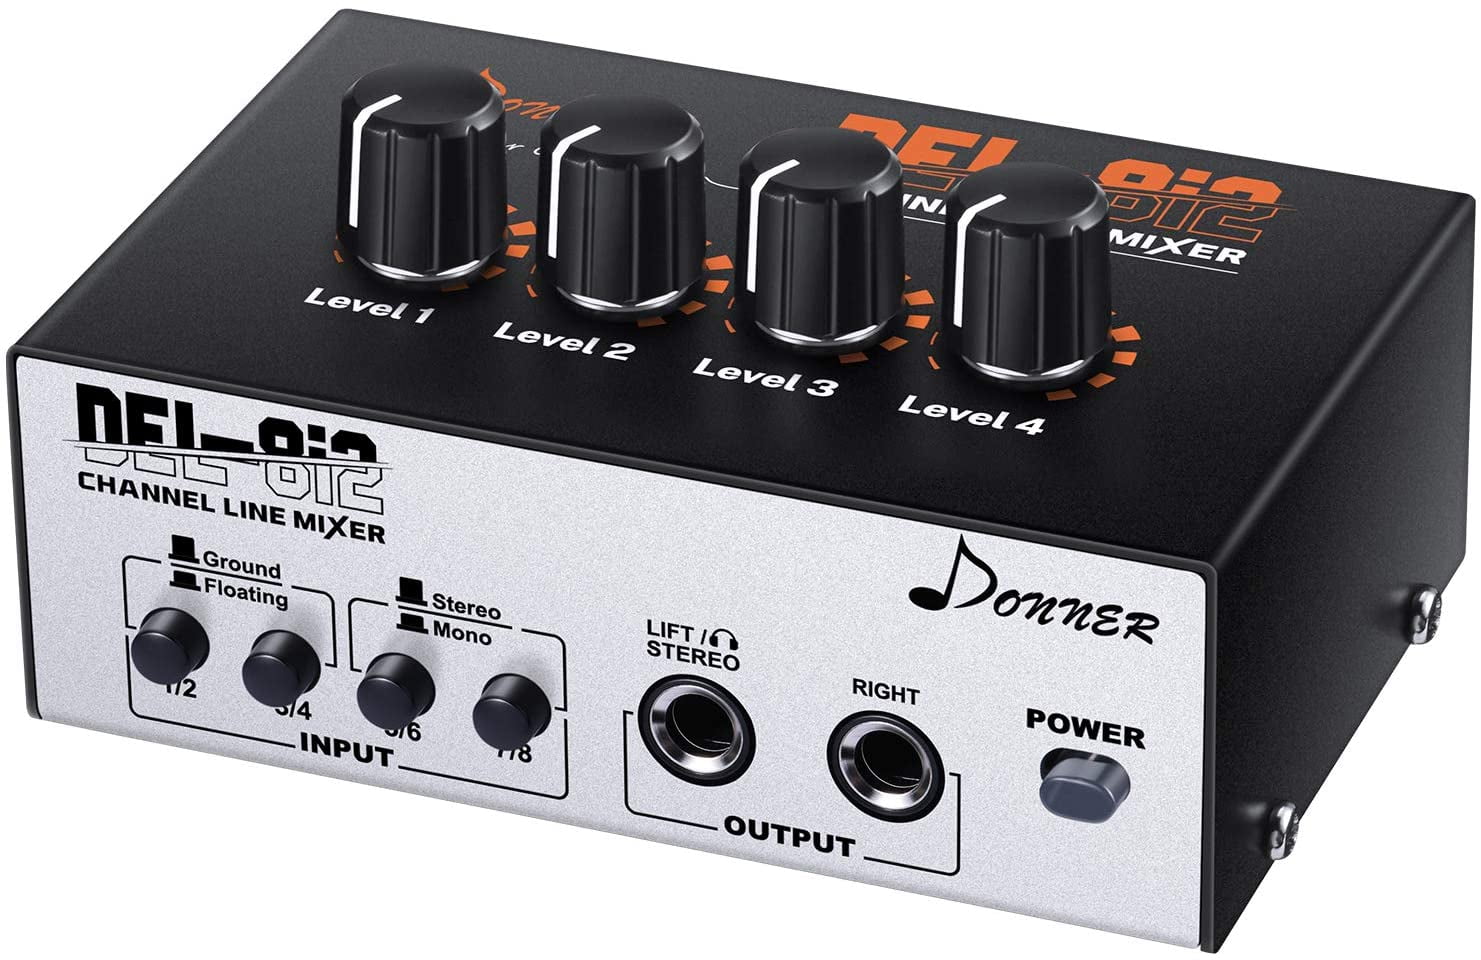 Audio Mixer, Donner Portable Stereo Line Mixer,4-Channel,As Microphones,Guitars,Keyboards or Stage Sub Mixer,Ideal for or Bar.With AC adapter,Stereo/Mono Adjustment,New Version-DEL-8i2 - Walmart.com